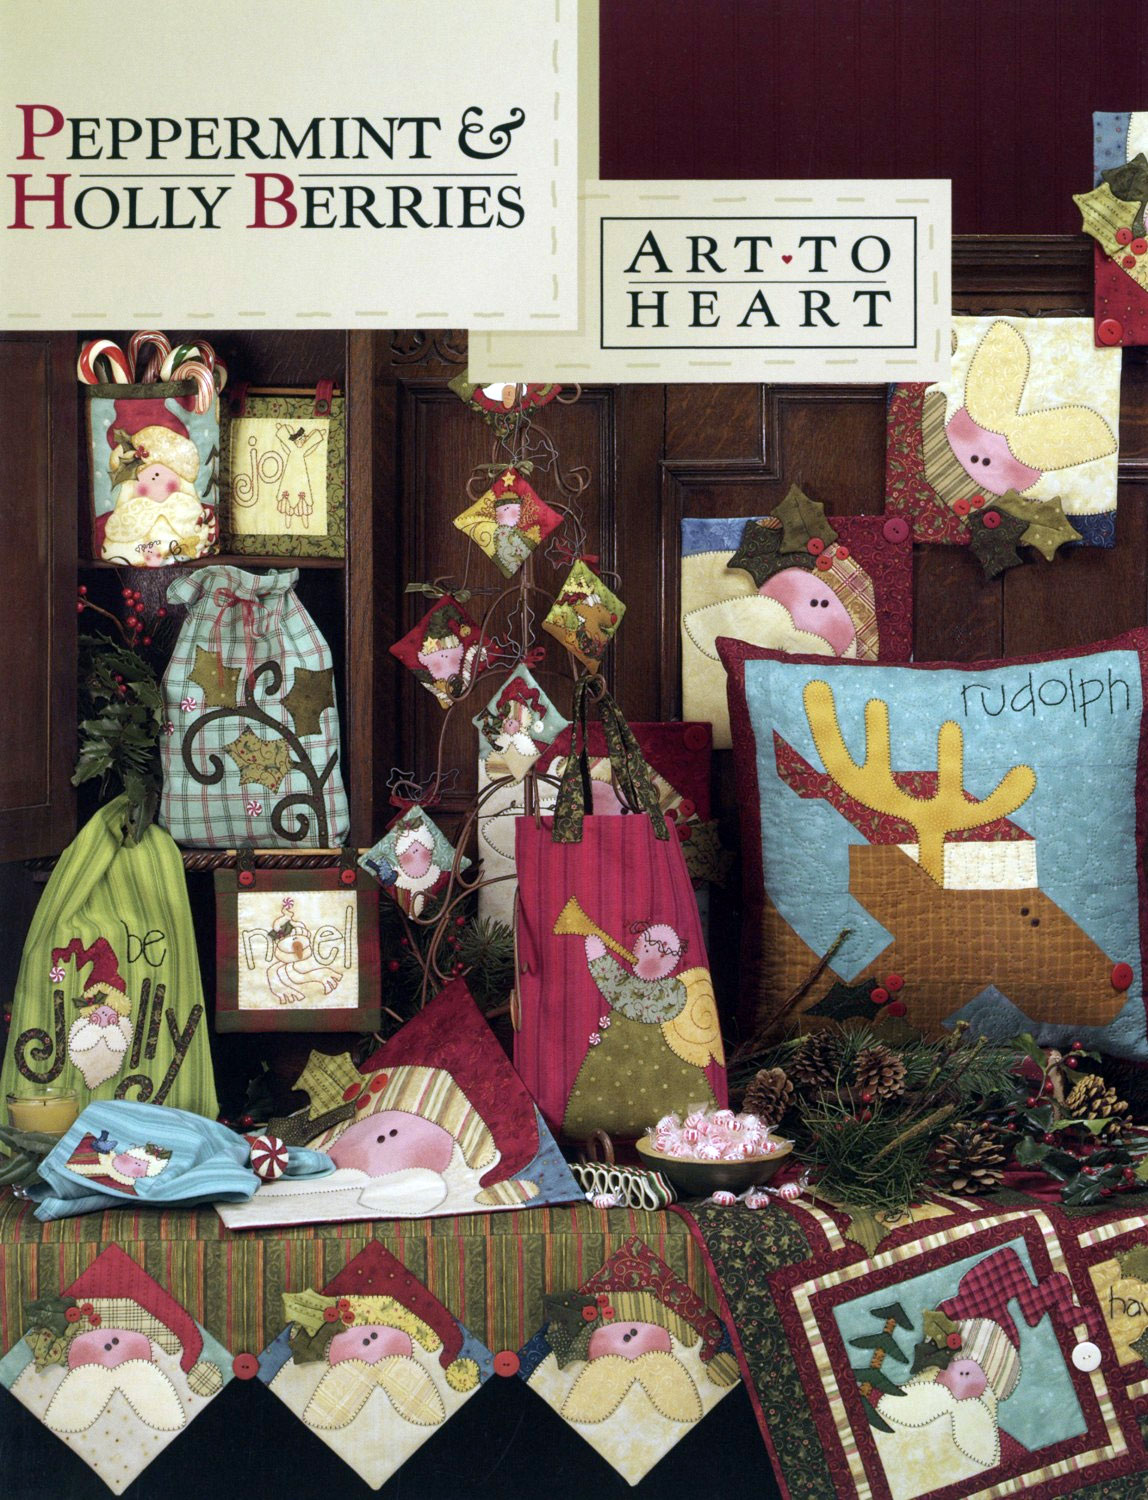 Peppermint-and-Holly-sewing-pattern-book-Art-To-Heart-front